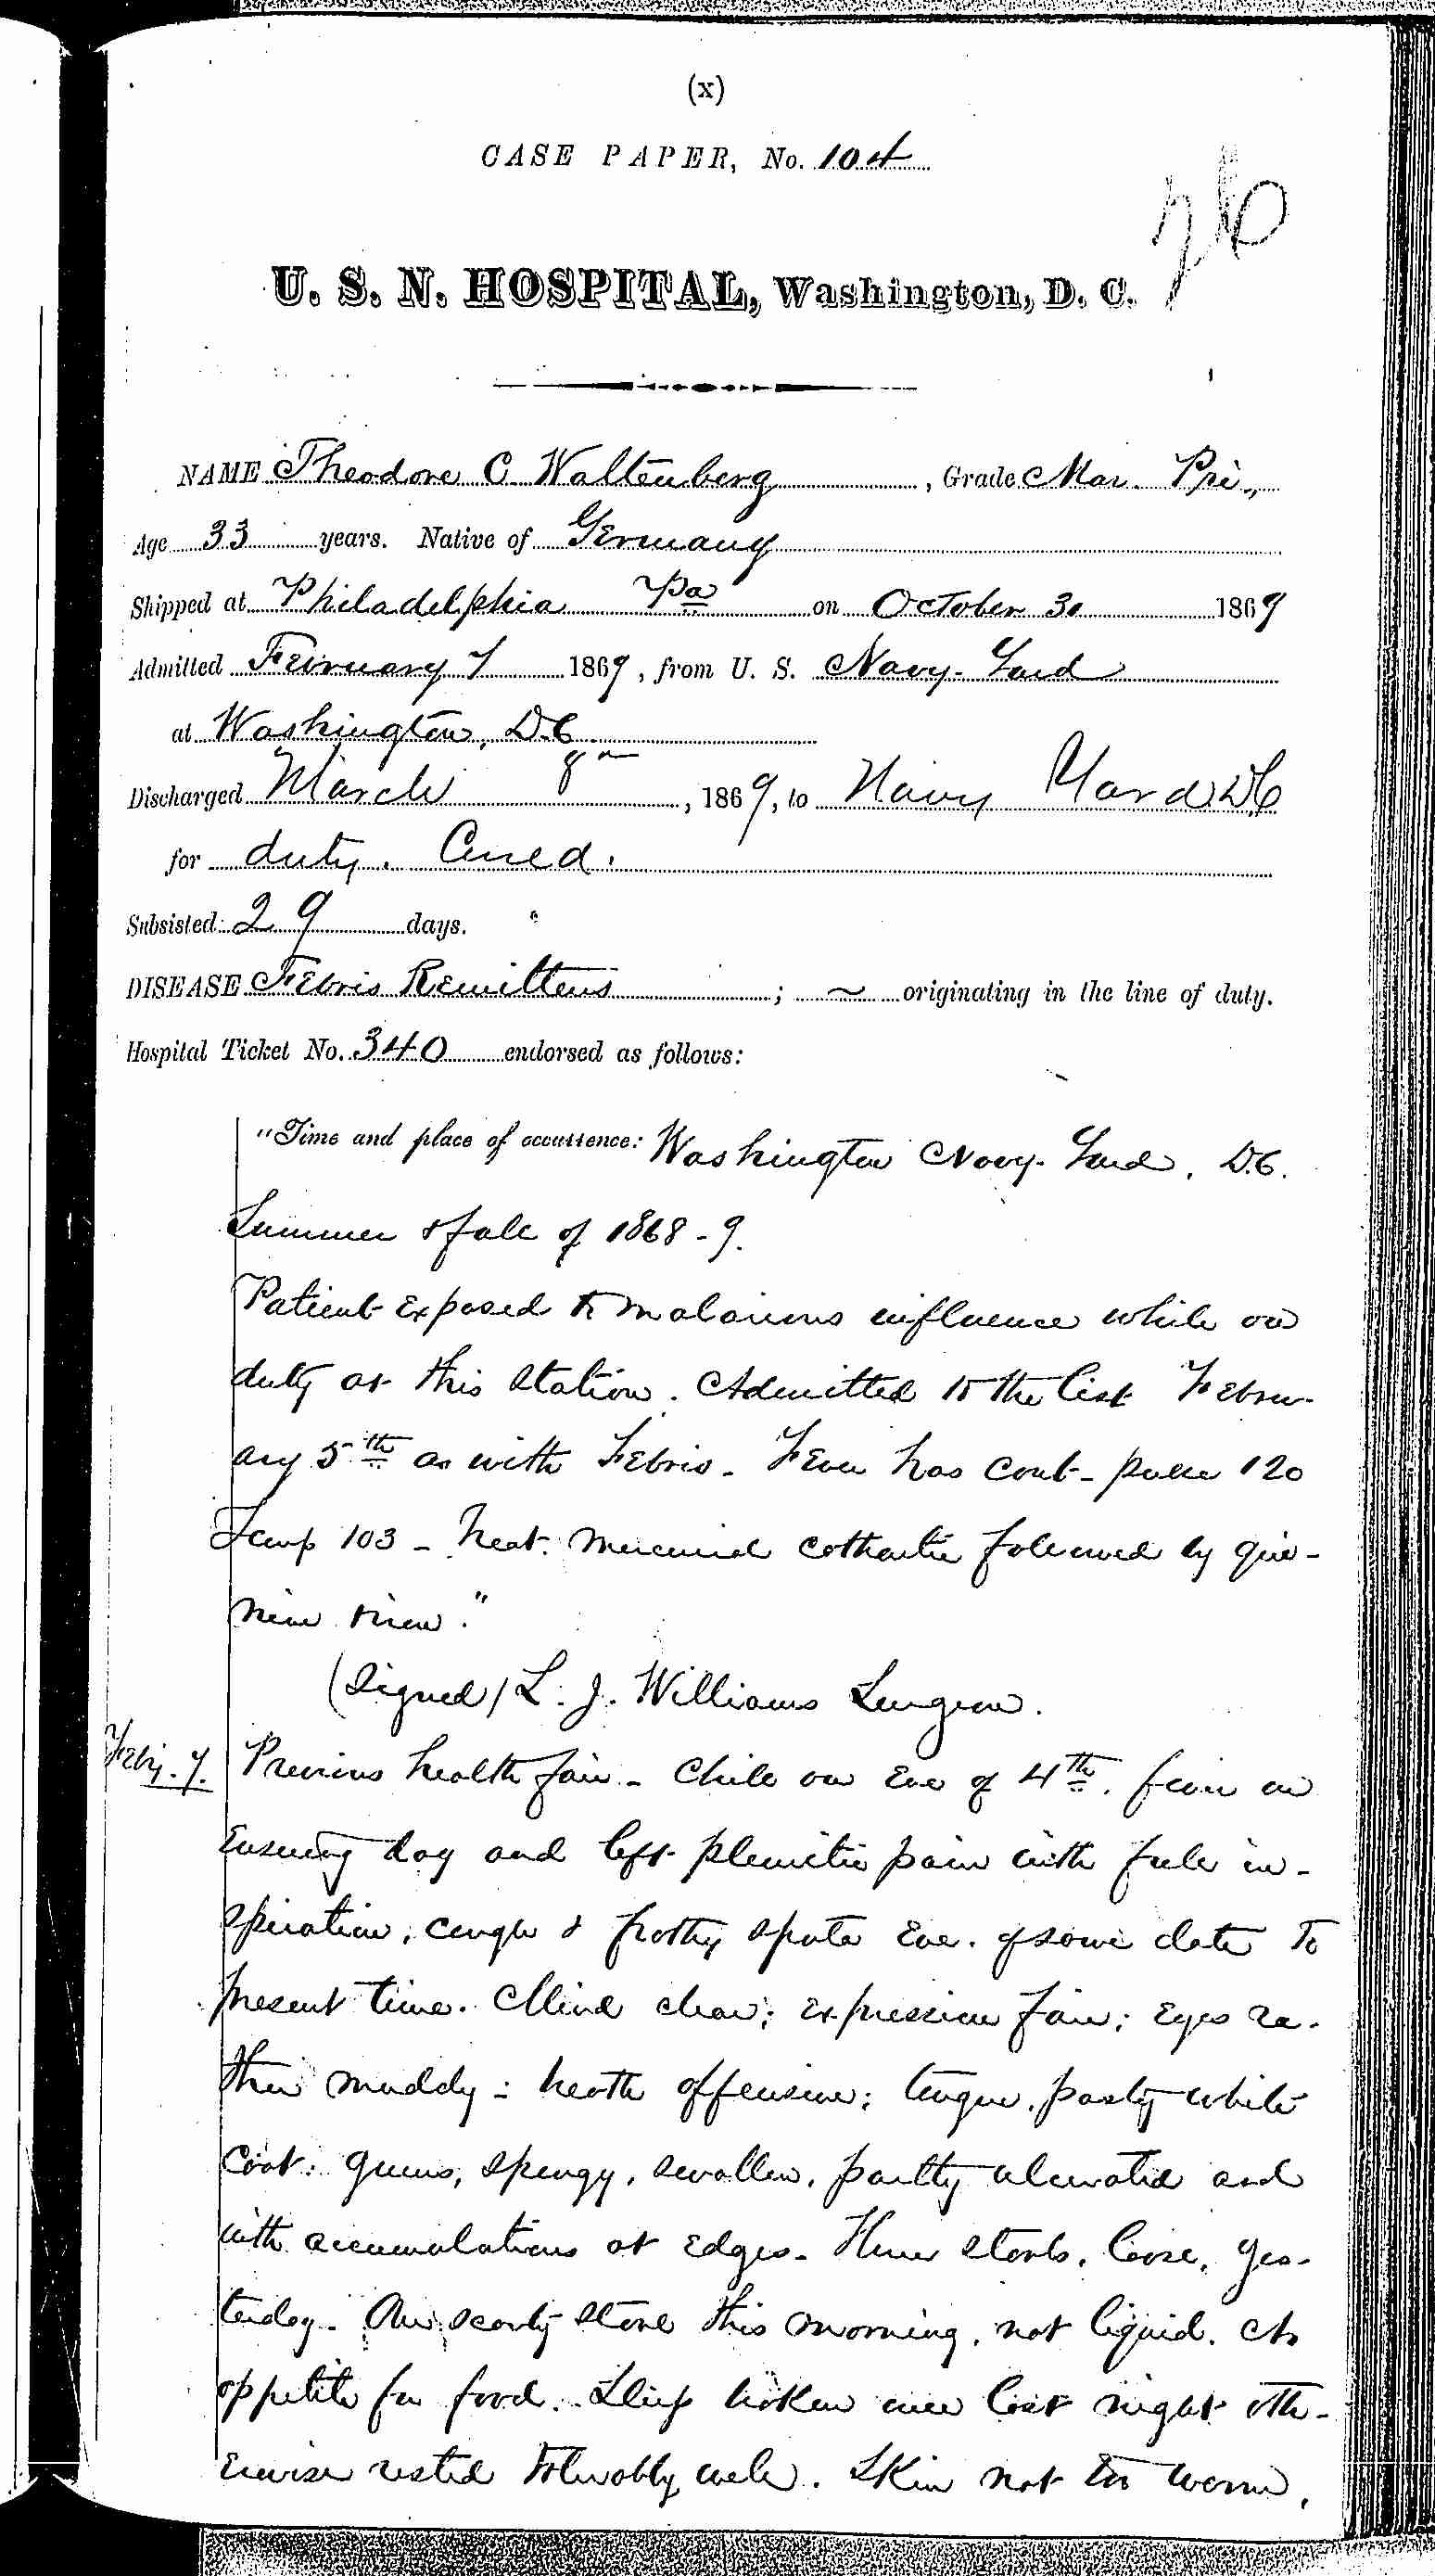 Entry for Theodore C. Waltenberg (page 1 of 4) in the log Hospital Tickets and Case Papers - Naval Hospital - Washington, D.C. - 1868-69